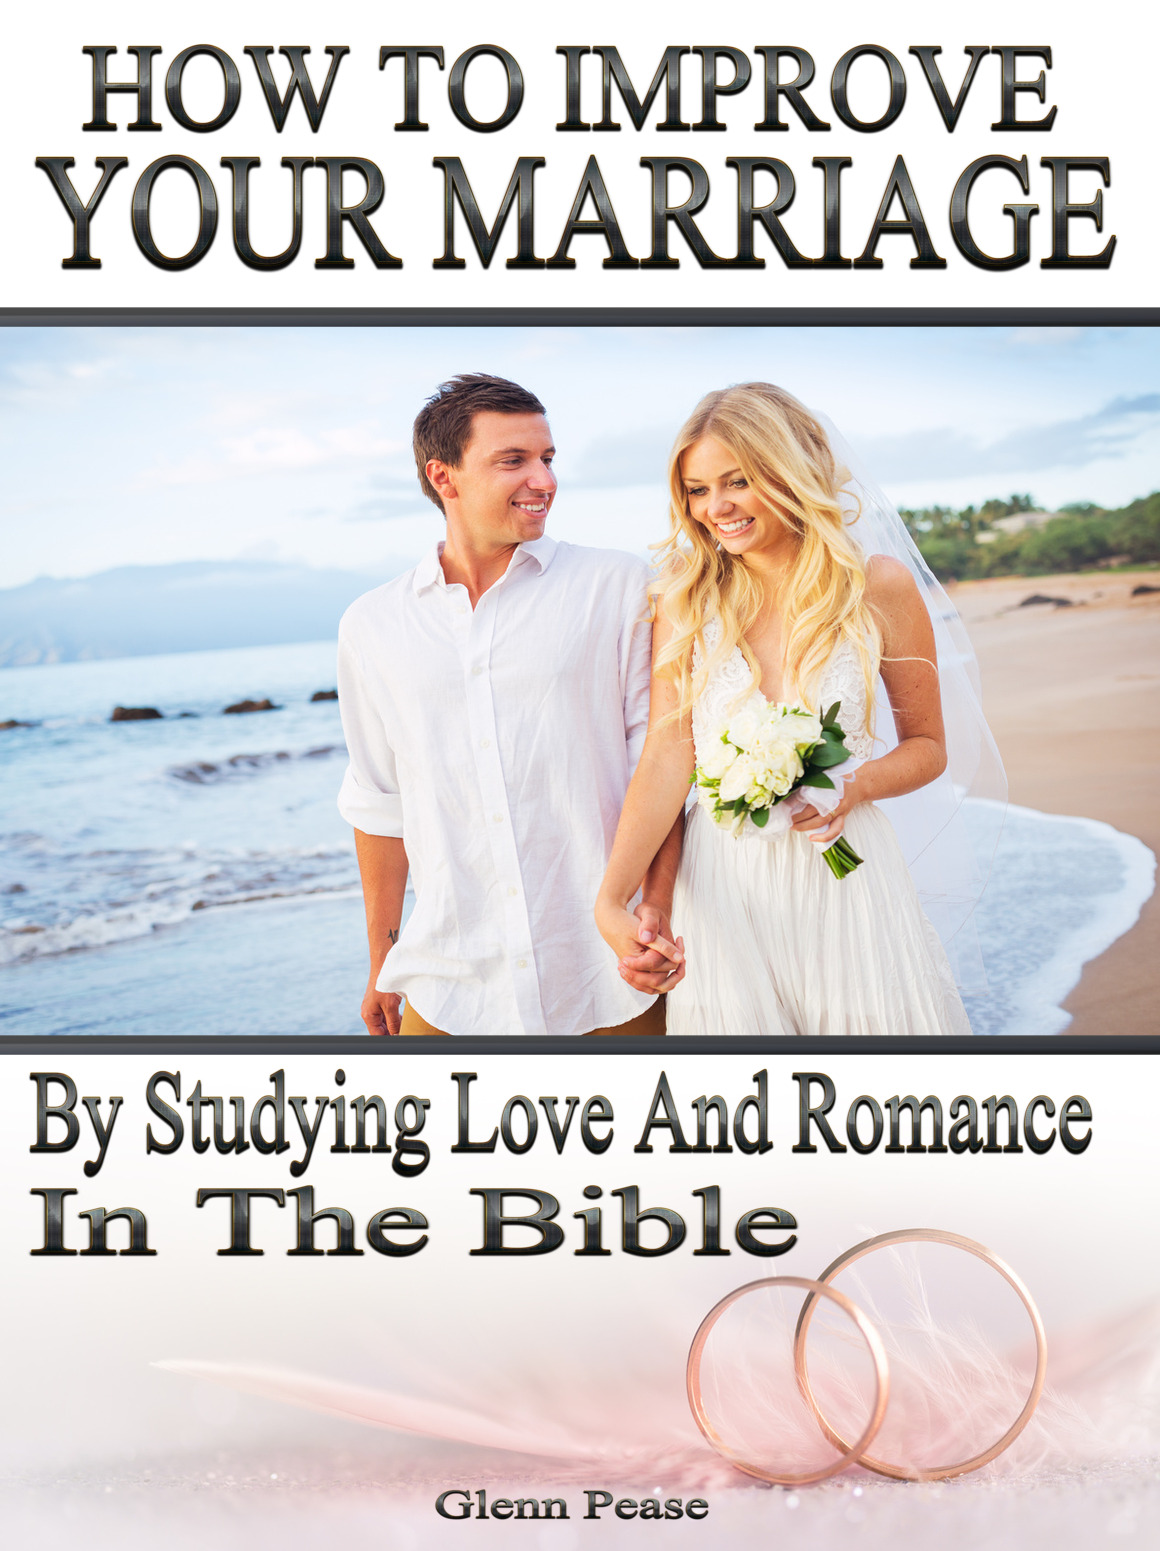 IMPROVE YOUR MARRIAGE